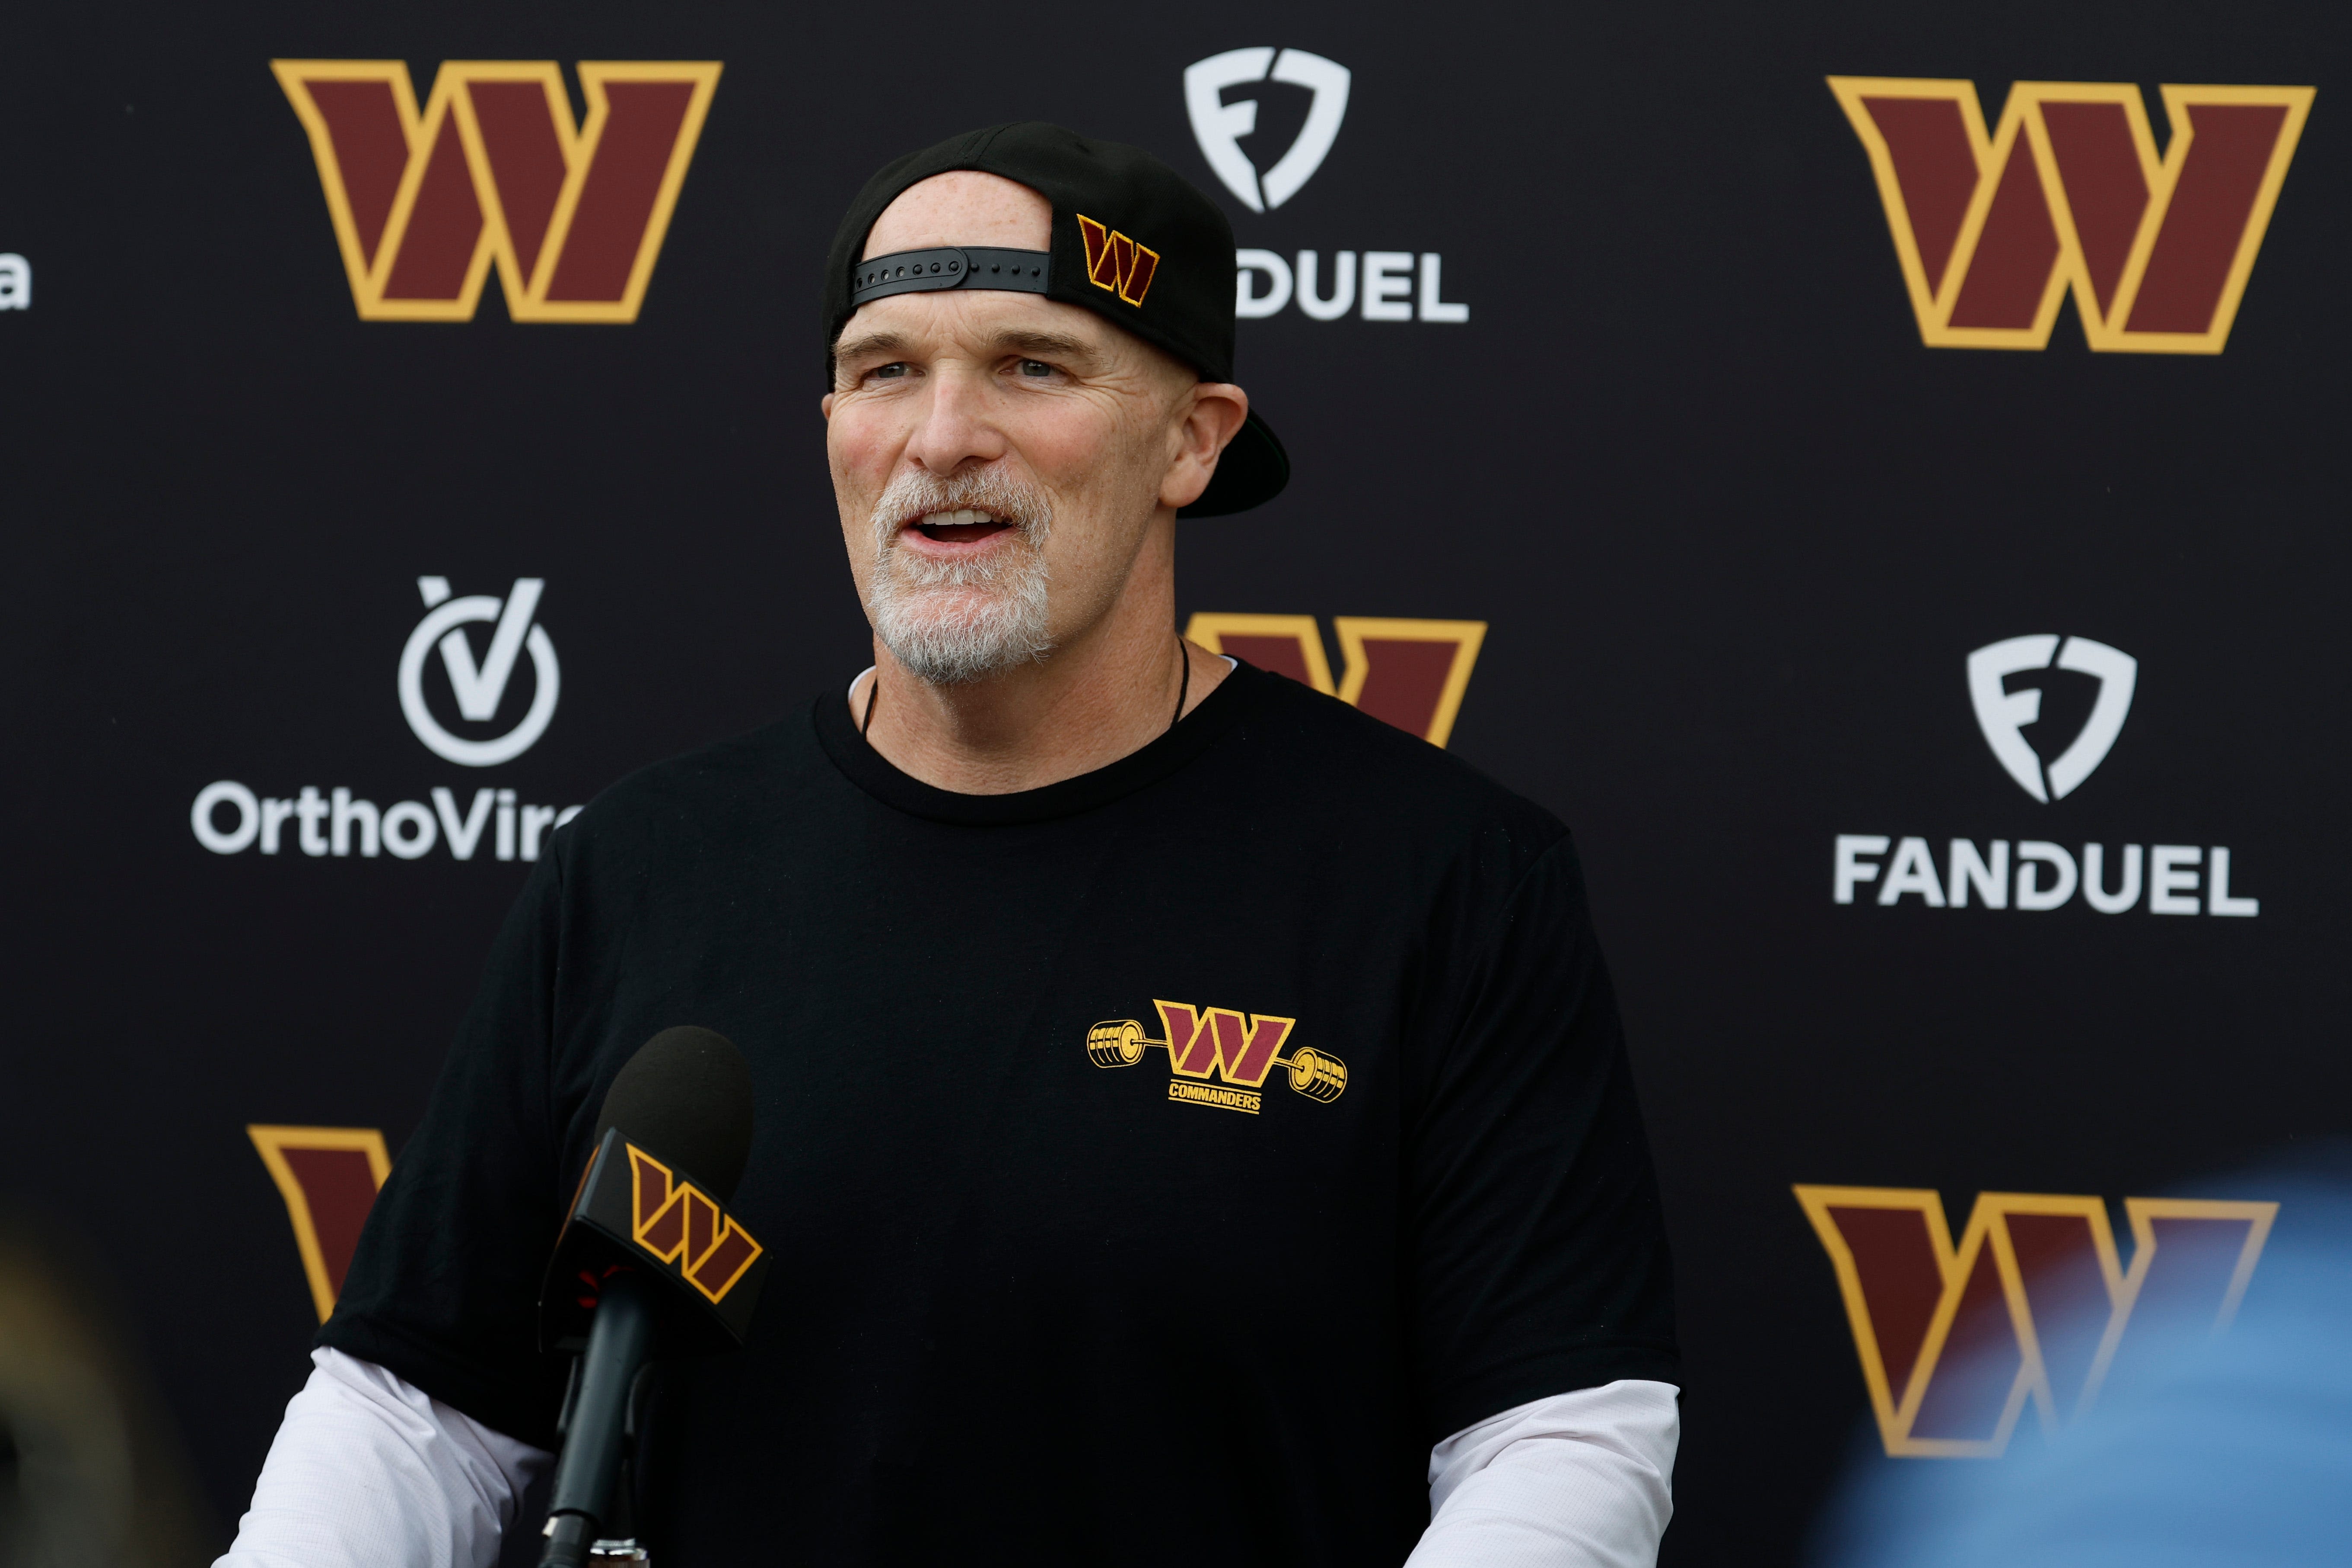 'A better version of me': What Dan Quinn says he will change in second stint as NFL head coach